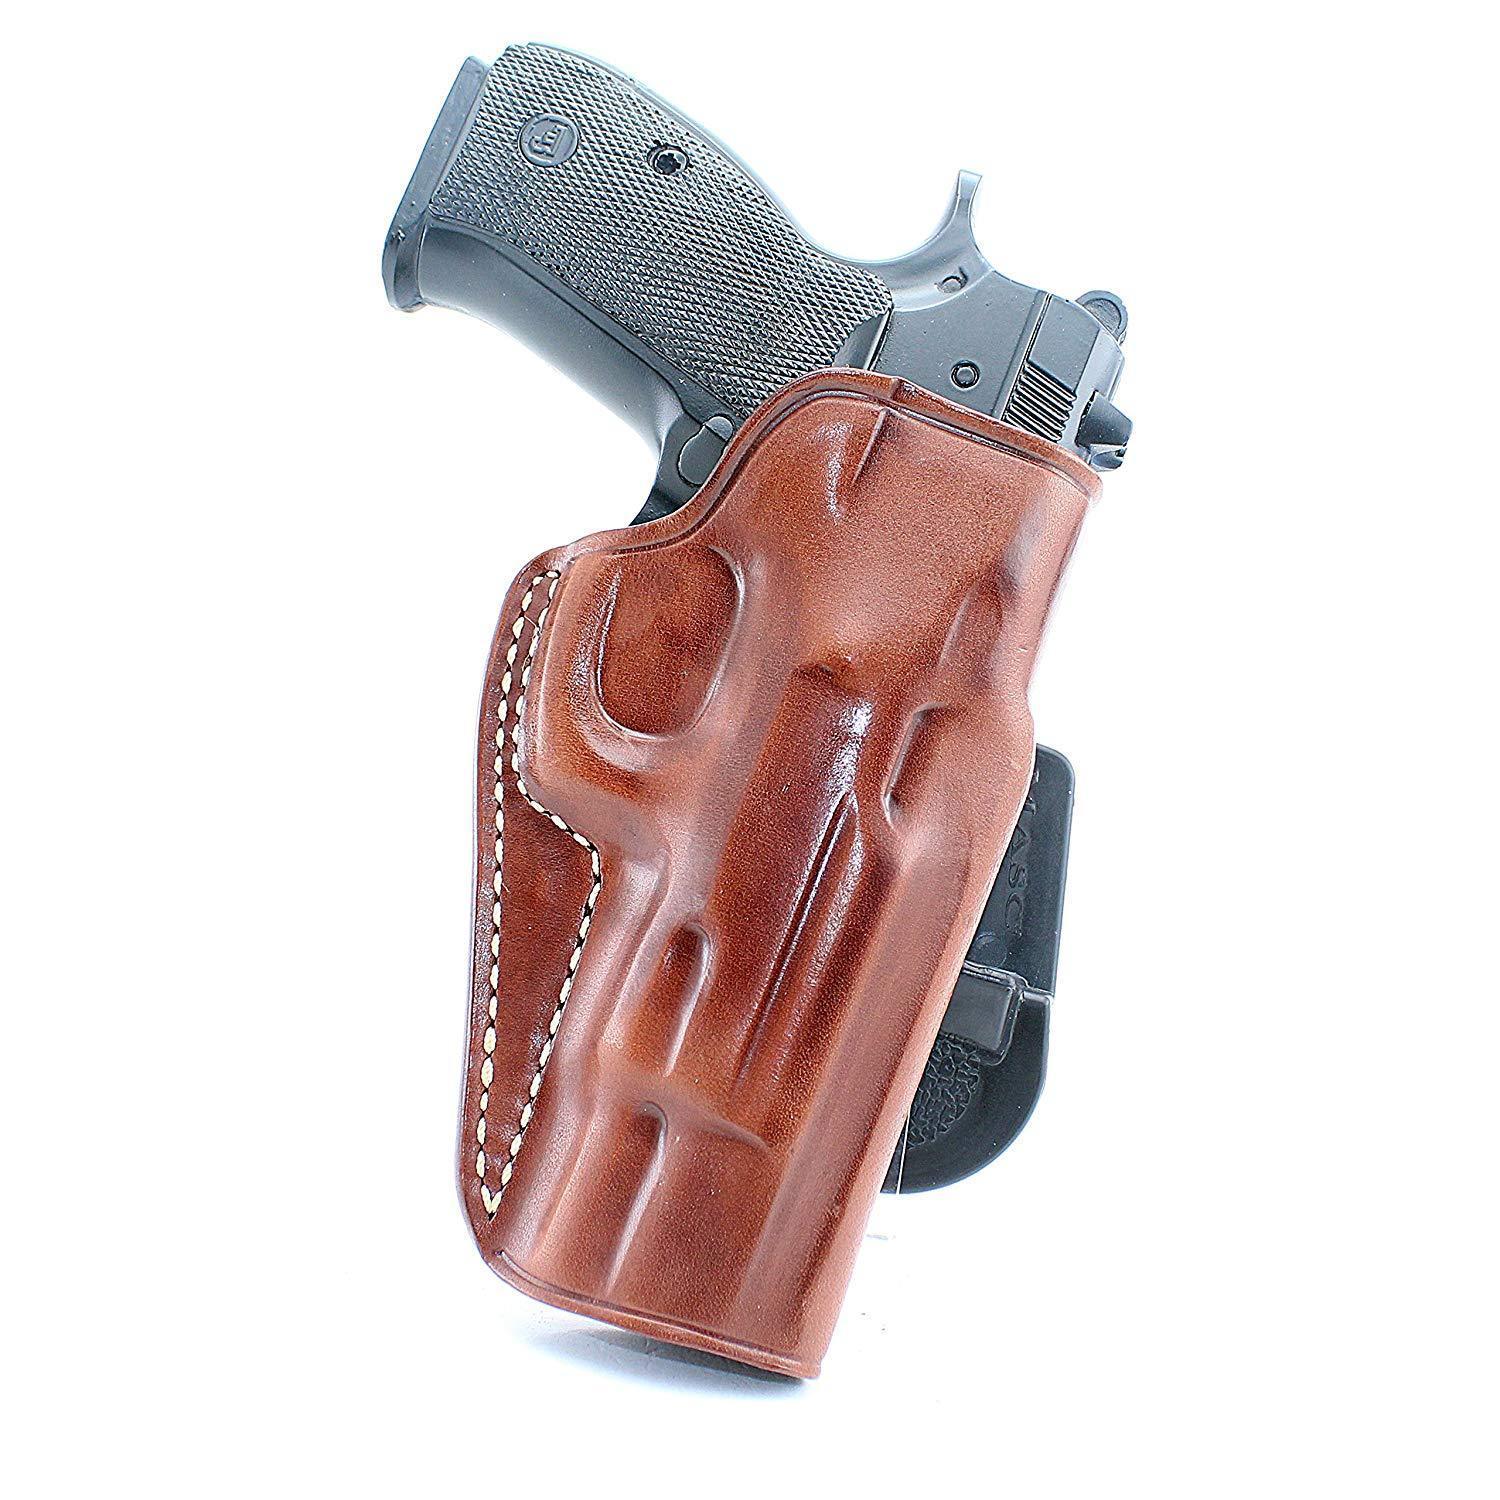 Leather Paddle Holster Fits CZ 75 SP-01 Shadow 9mm 4.7" Barrel #1310# - $68.99